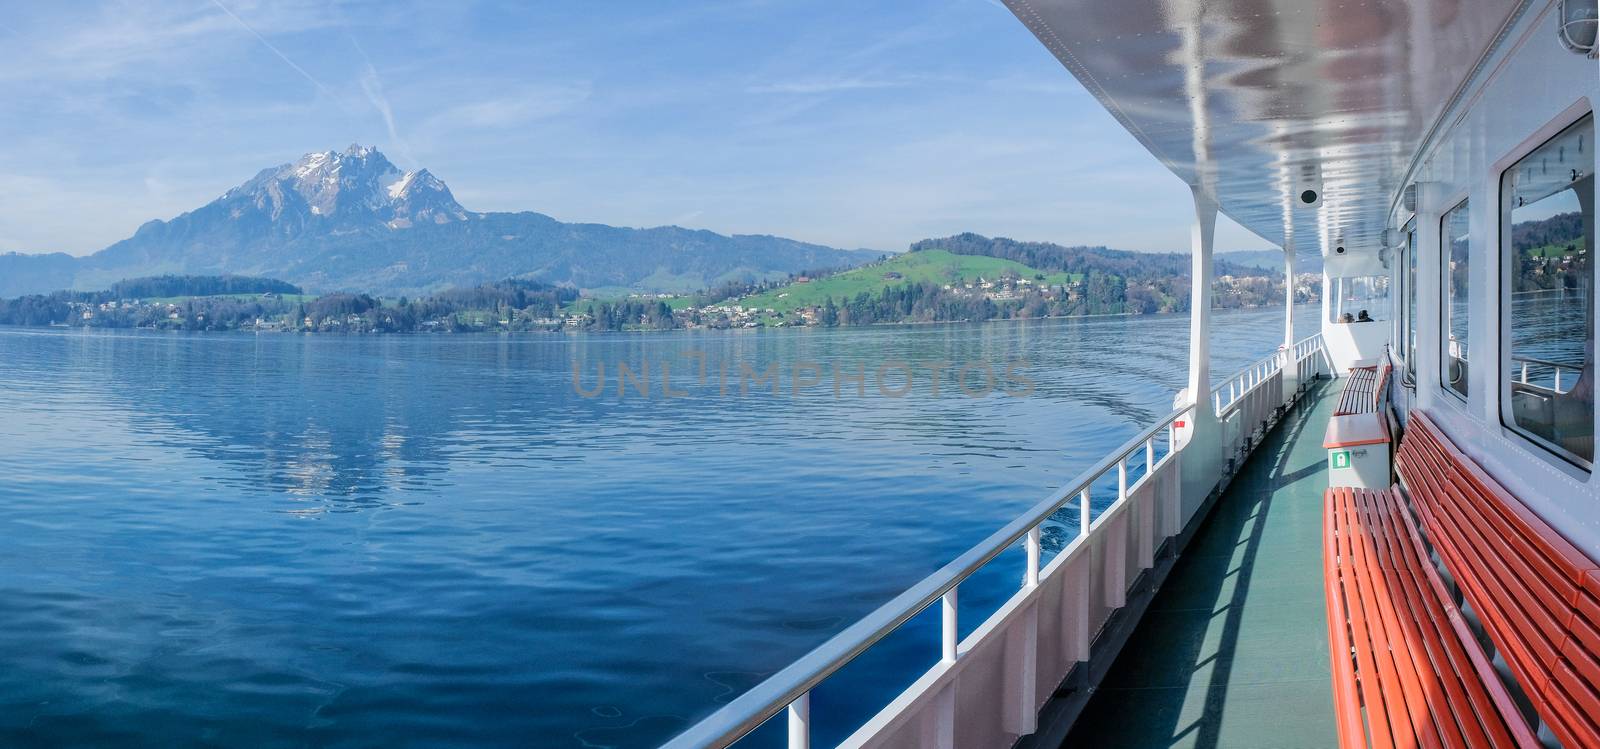 The outside deck of a ferry on lake Lucerne
 by Surasak